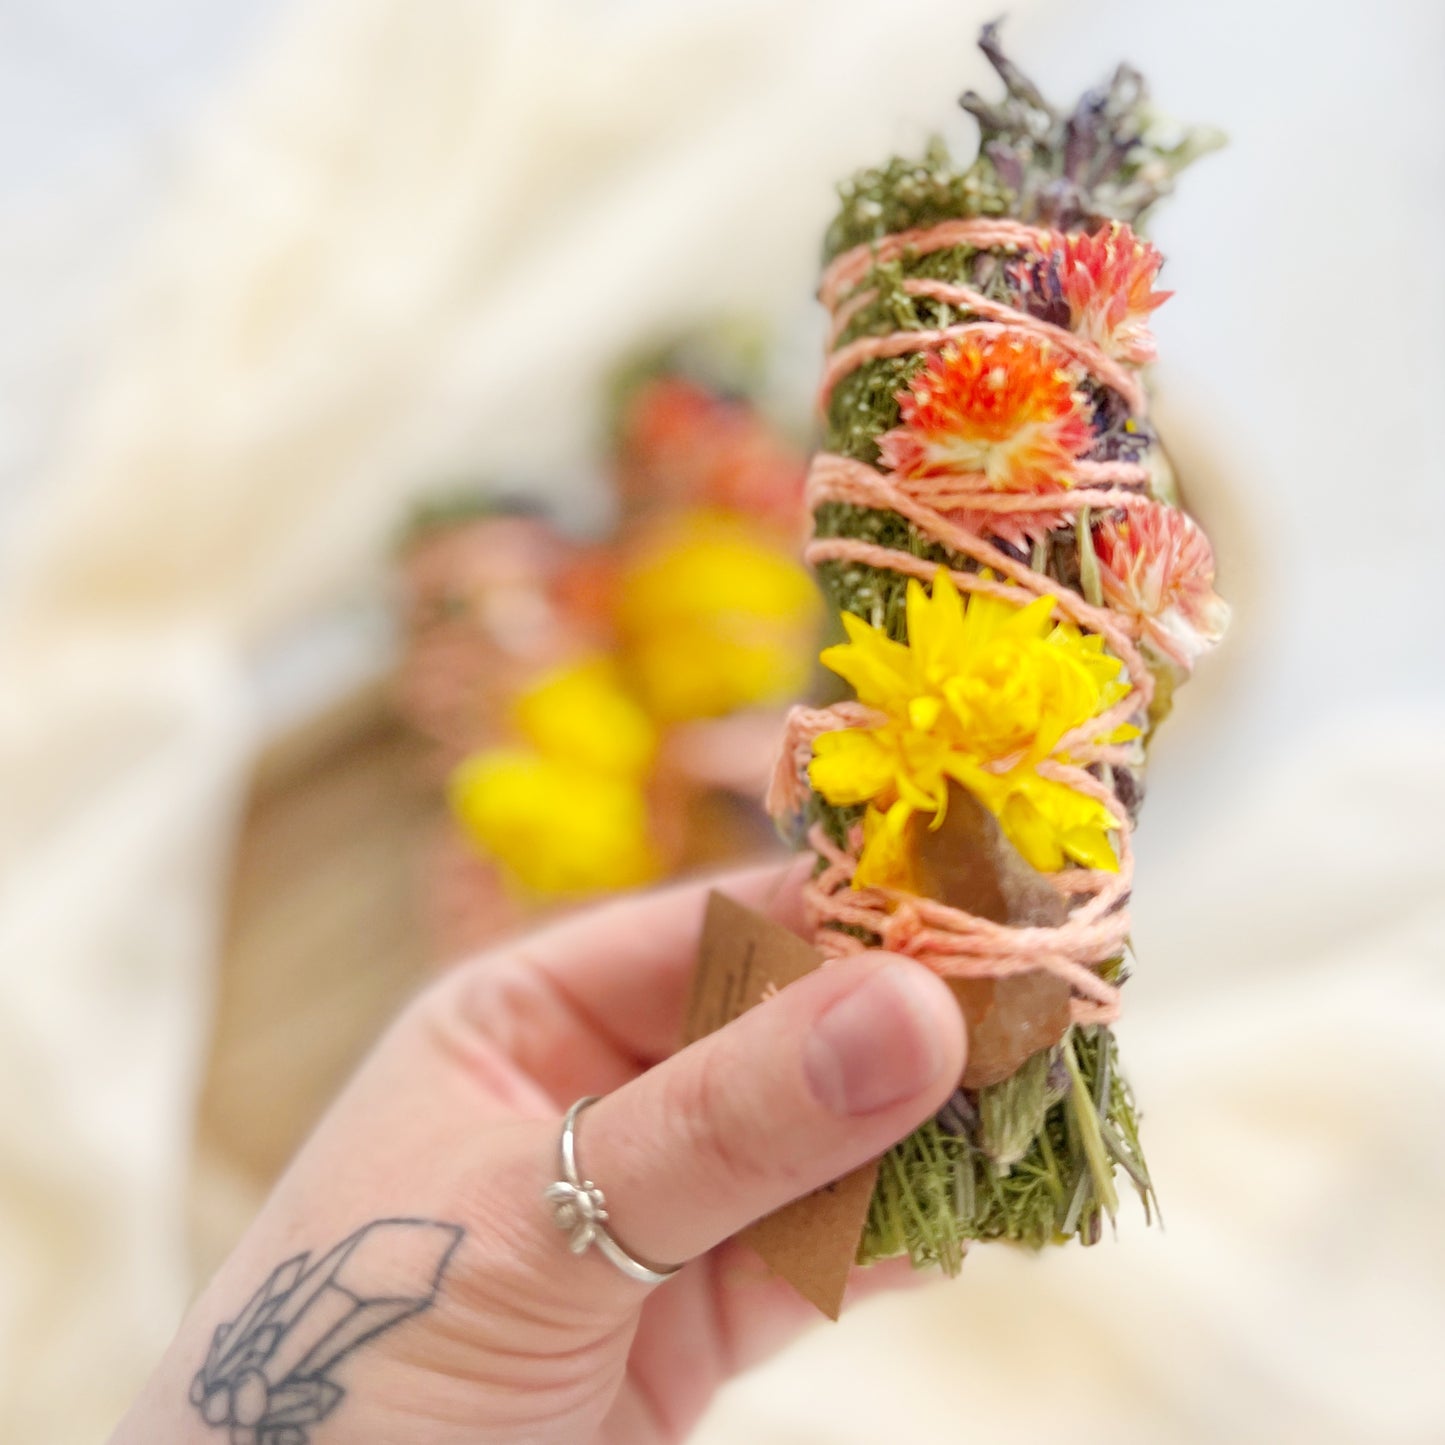 Herbal cleansing bundle for celebrating Litha and the Summer Solstice